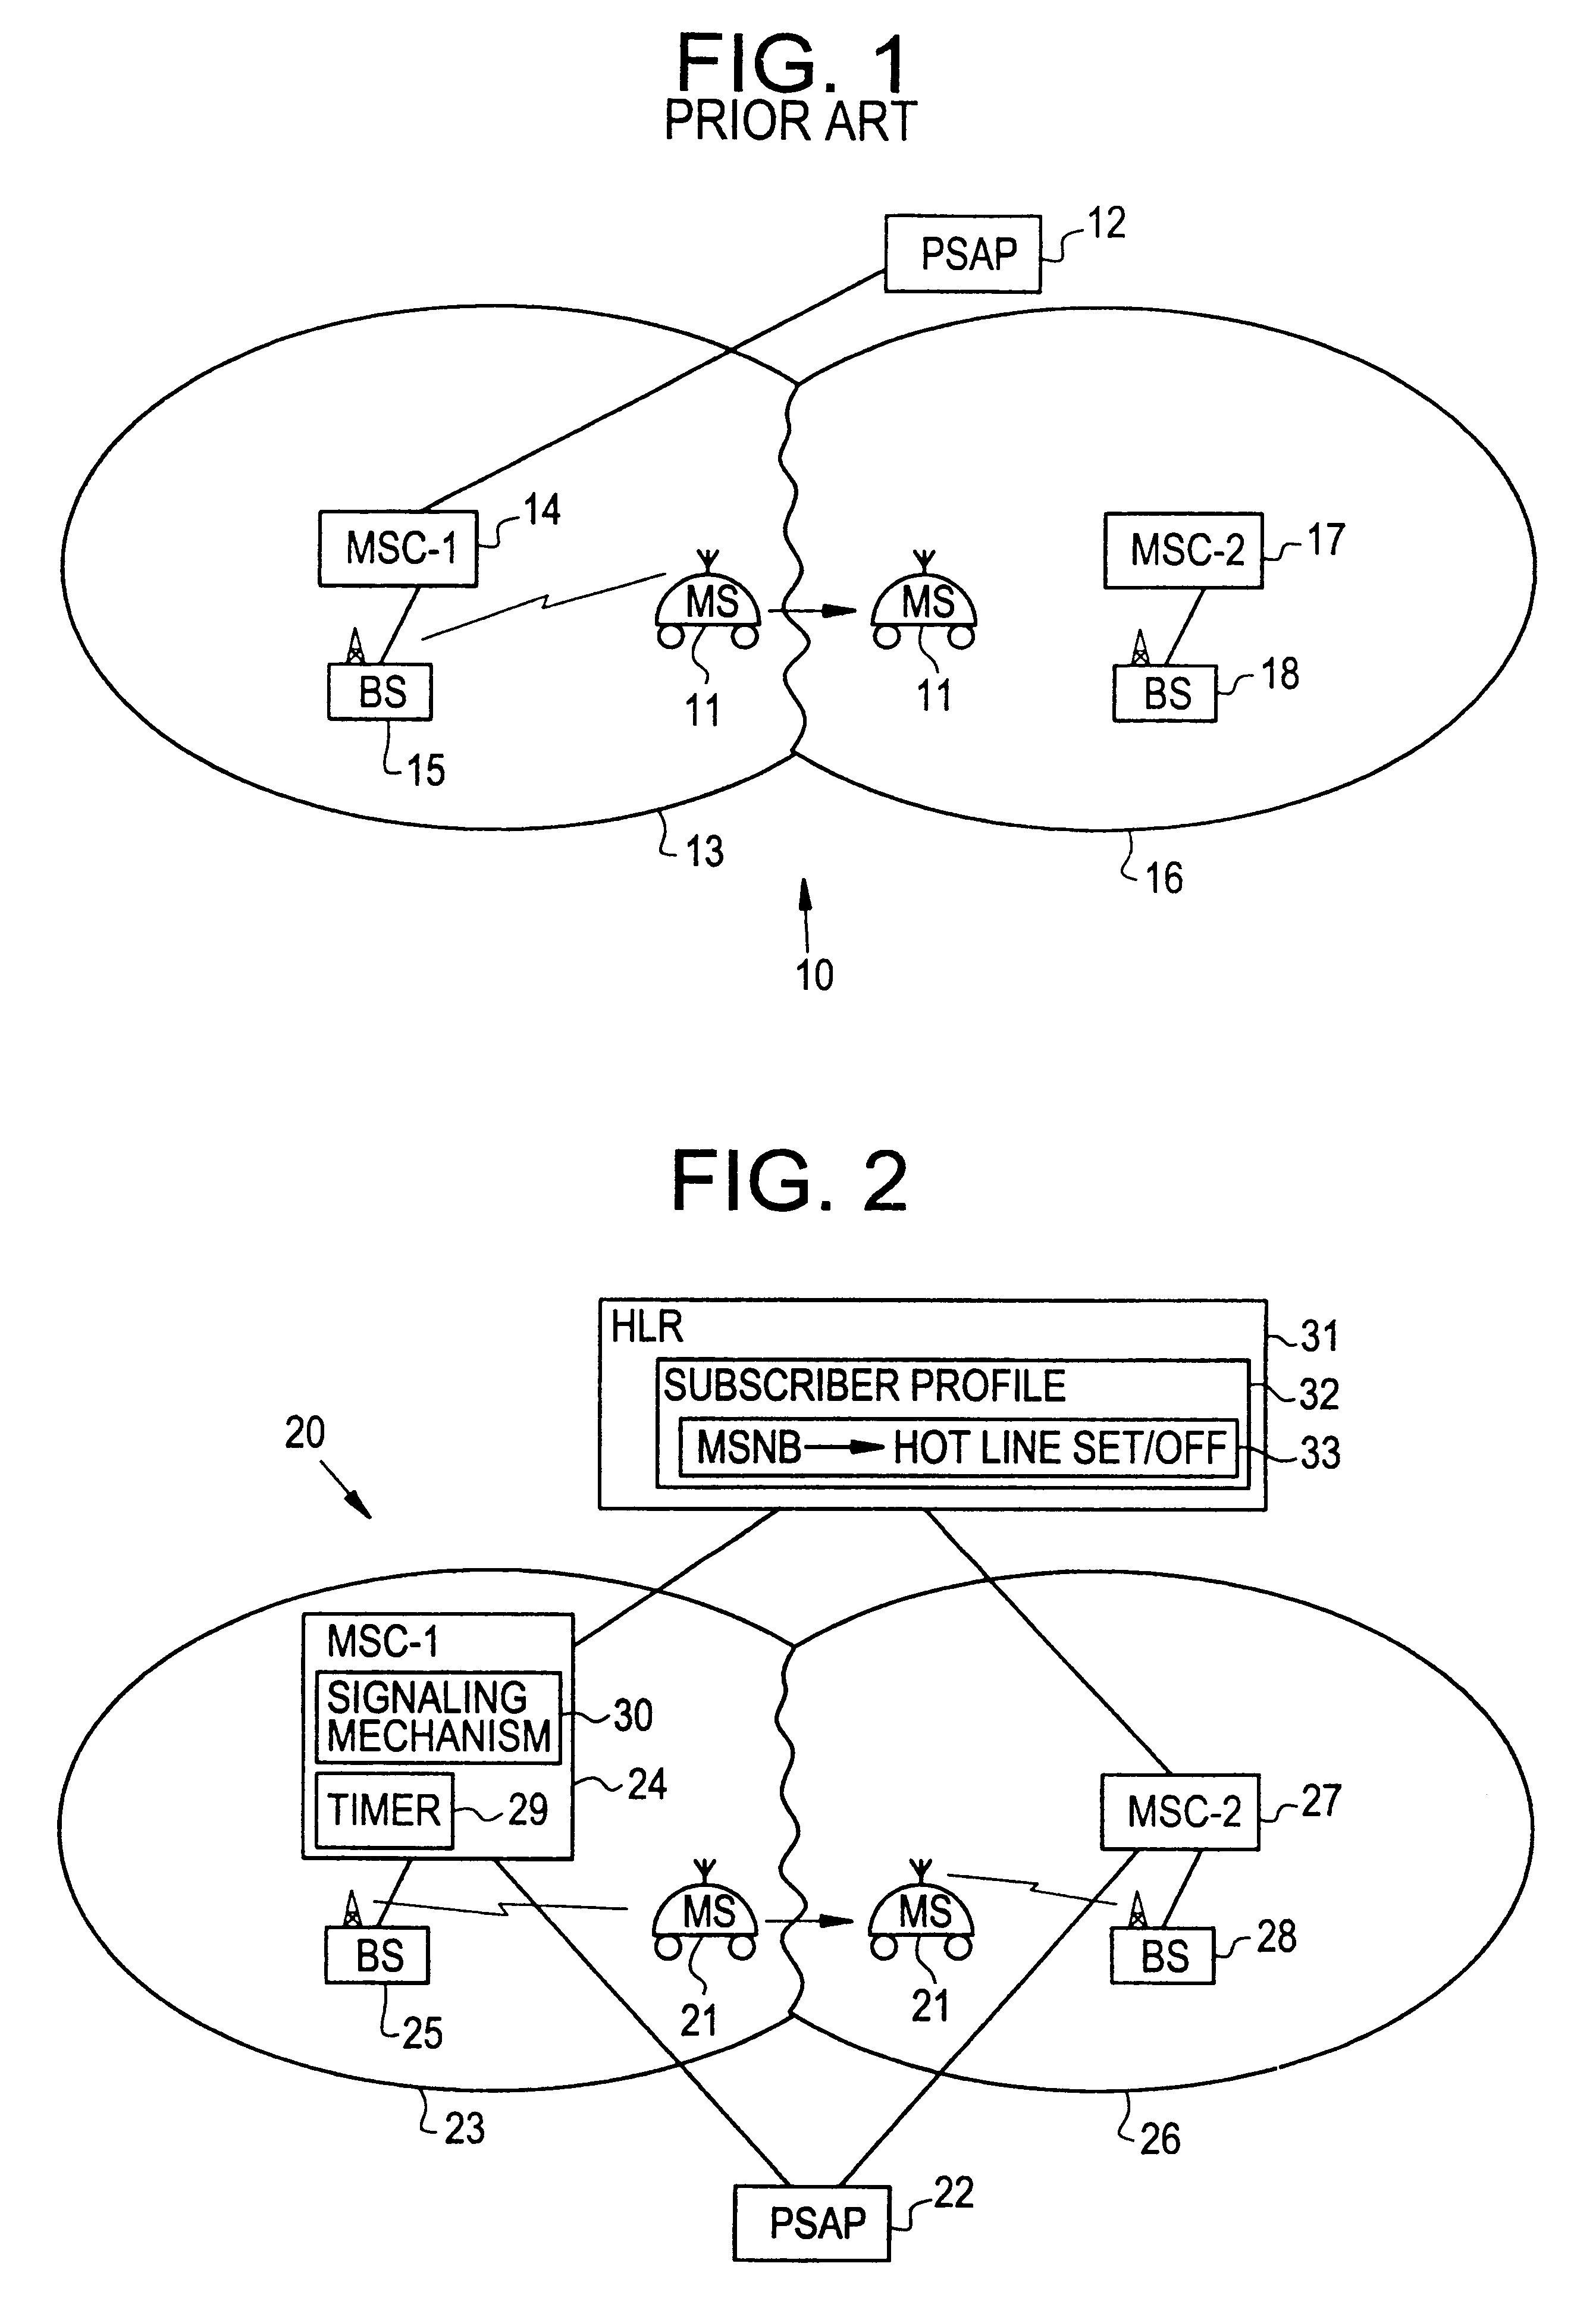 System and method of handling emergency calls from roaming mobile stations in a radio telecommunications network